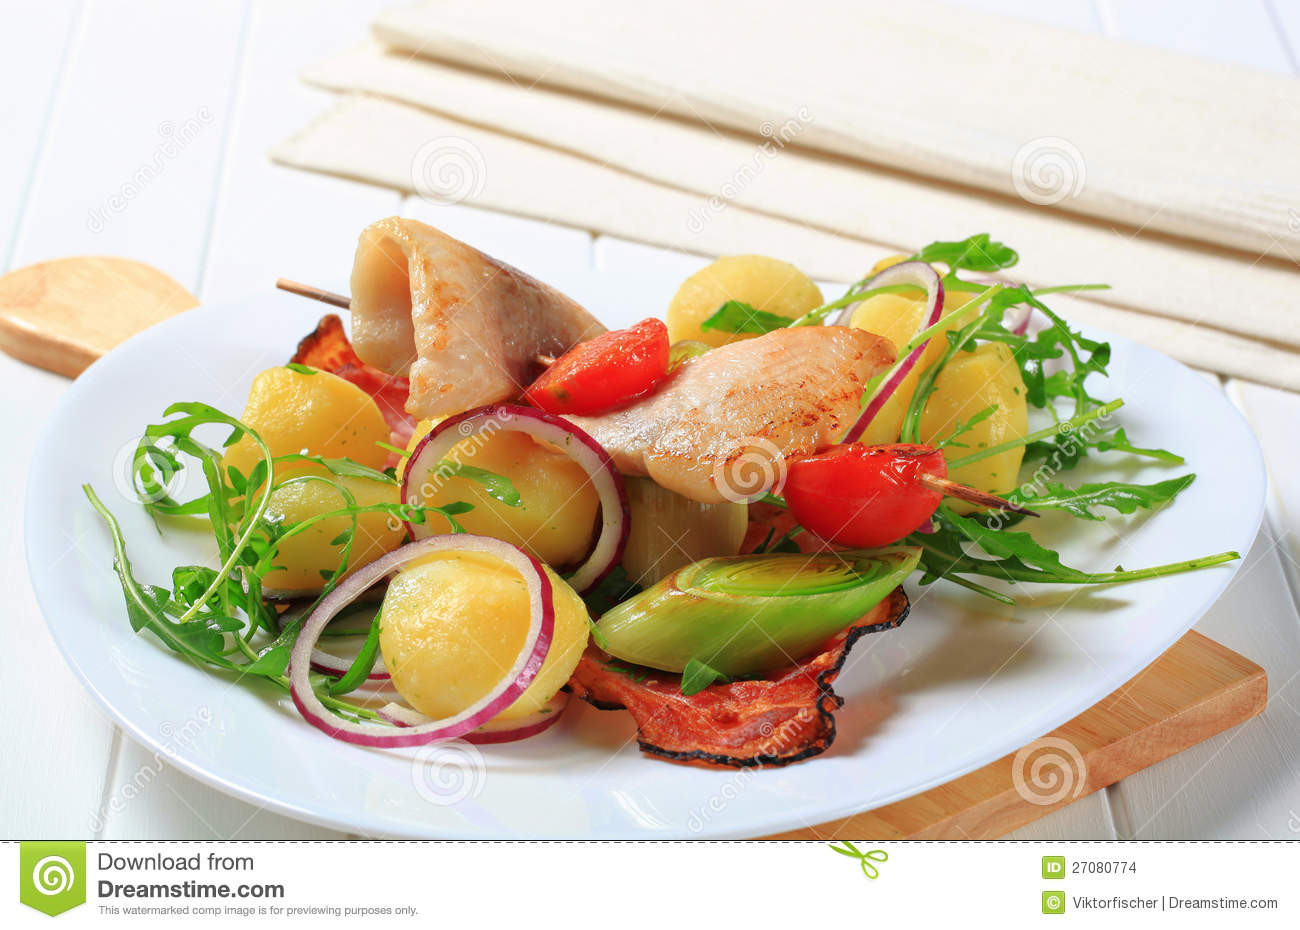 Potato Side Dishes For Fish
 Fish Skewer With Potato Side Dish Stock Image of